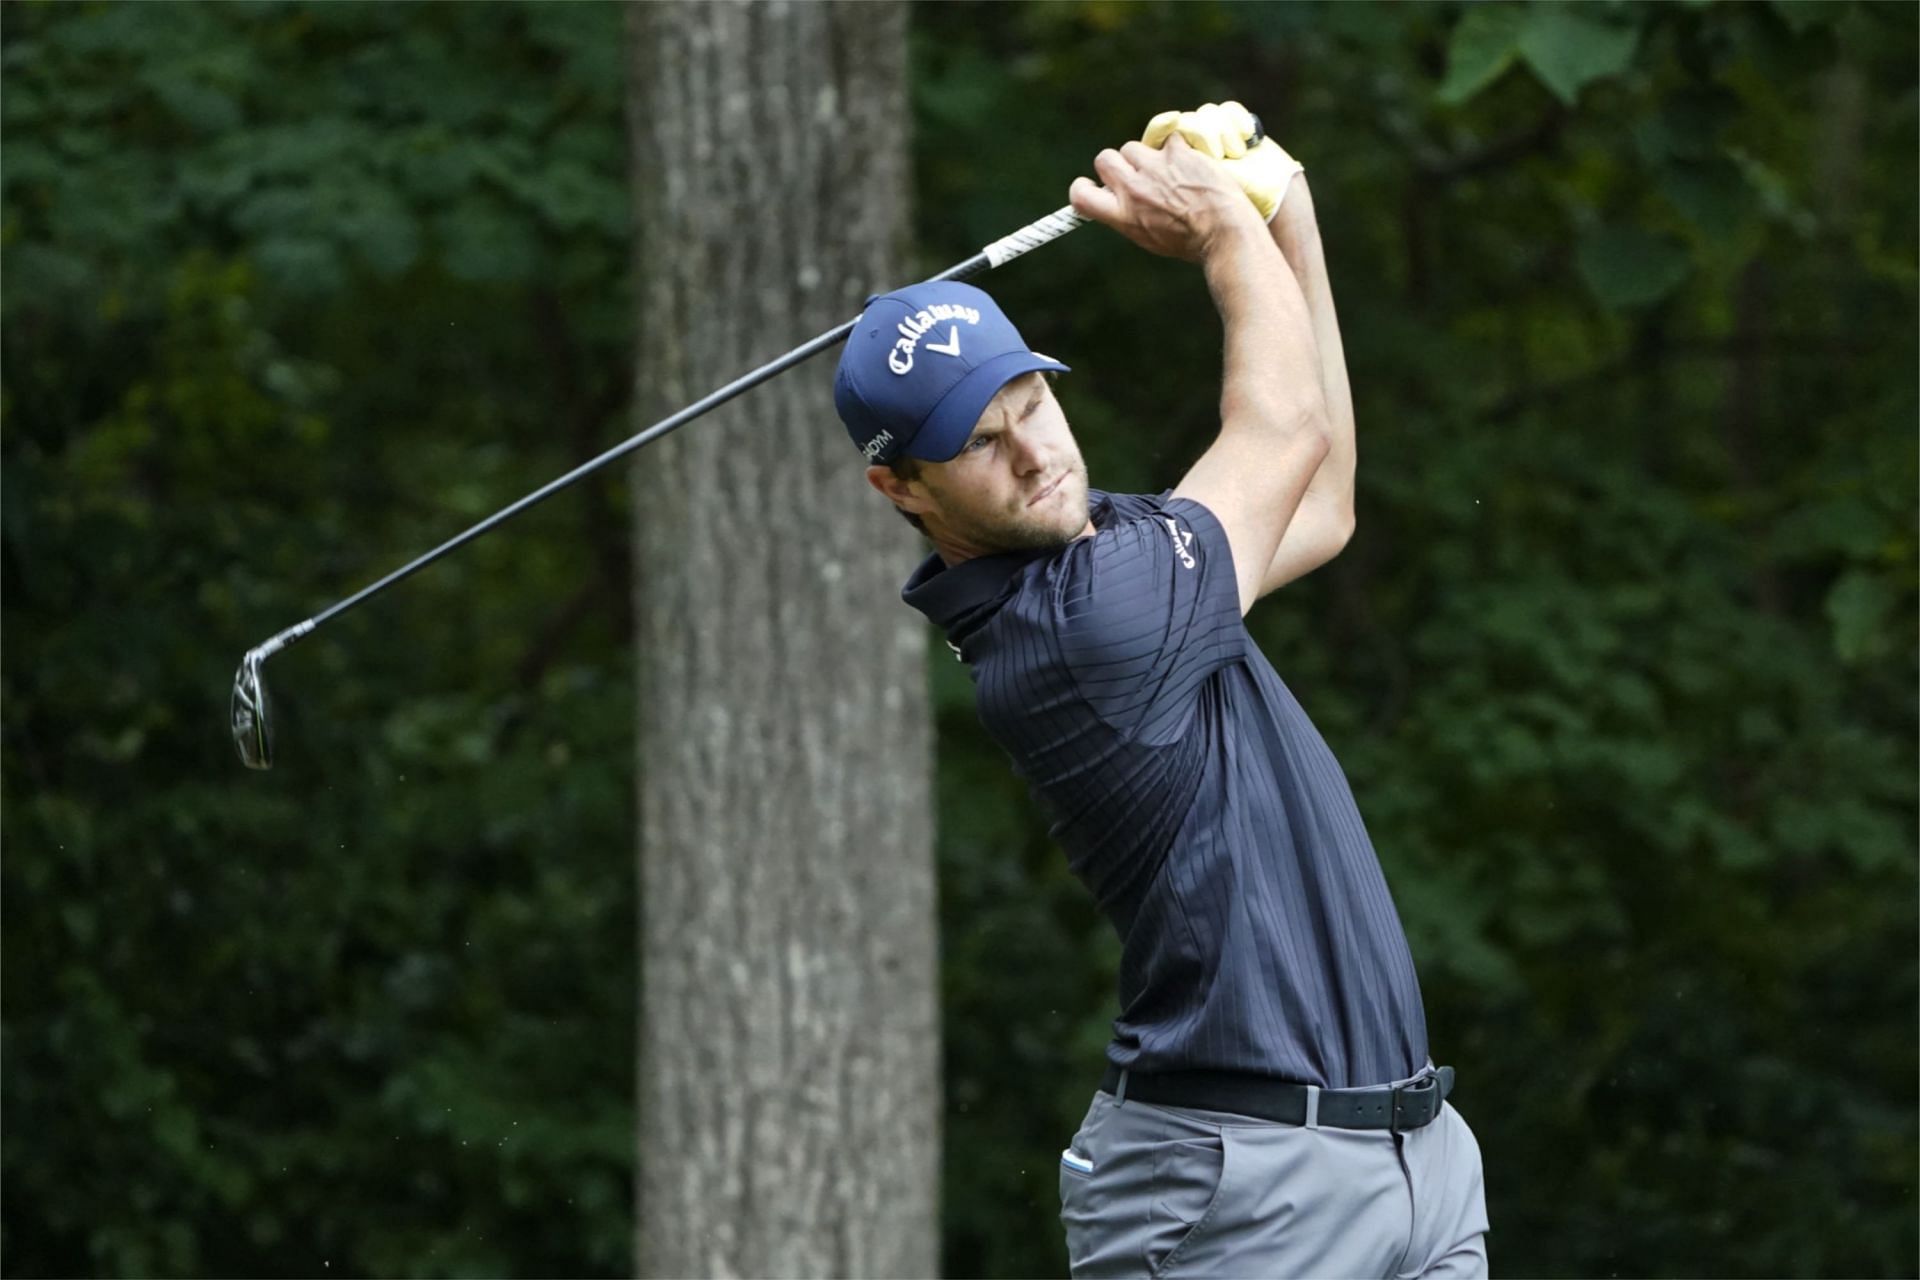 Thomas Detry watches his tee shot on the second hole during the second round of the &lt;a href=&#039;https://www.sportskeeda.com/tournament/wyndham-championship/&#039; target=&#039;_blank&#039; rel=&#039;noopener noreferrer&#039;&gt;Wyndham Championship&lt;/a&gt;